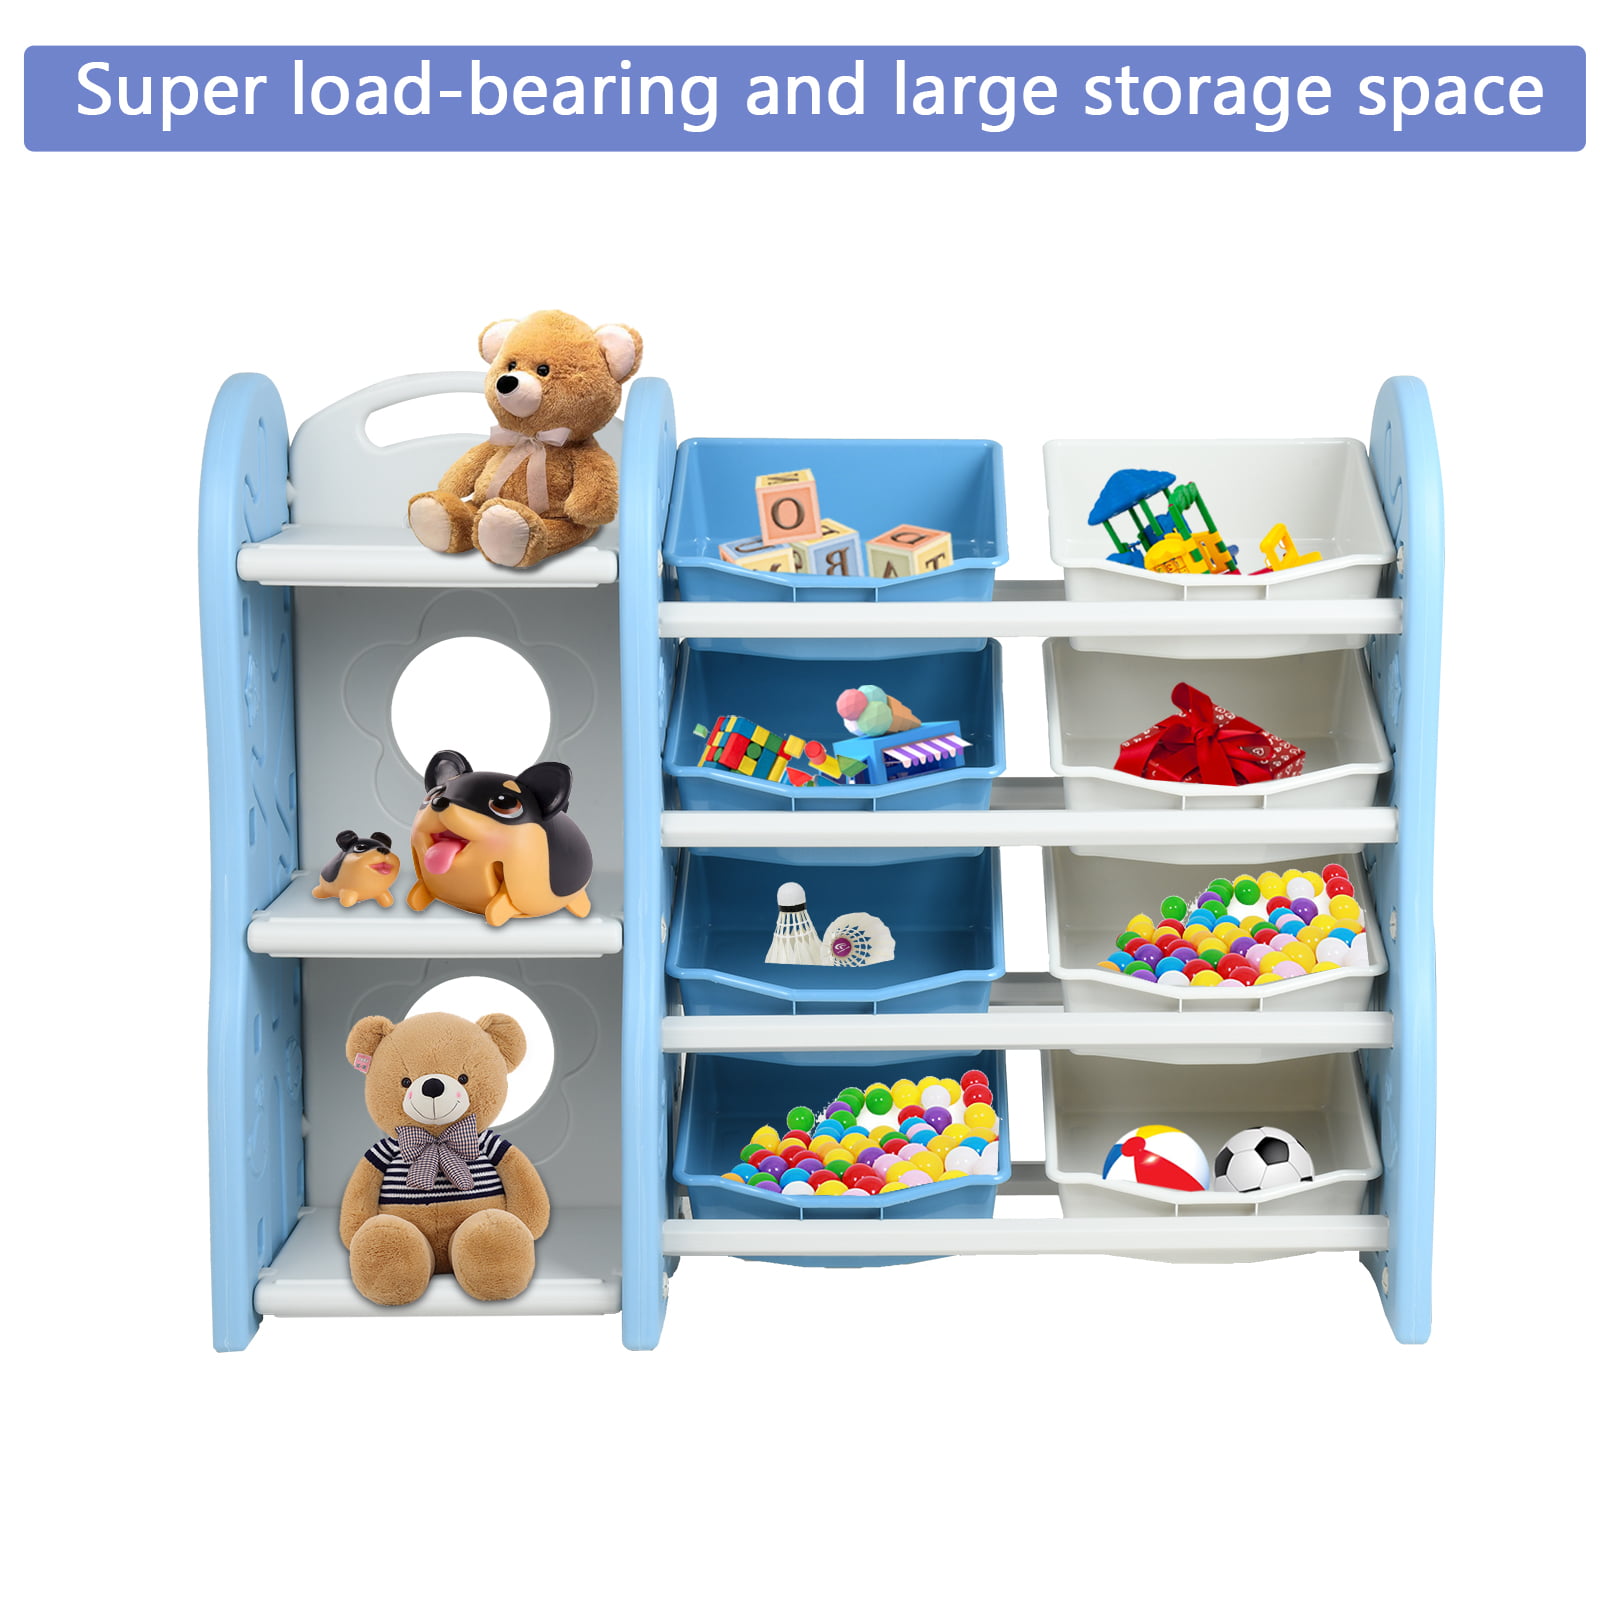 Uenjoy 2 in 1 Kids Toy Storage Rack with Bookshelf &8 Large Storage Drawers,Suitable for Boys Girls Bedroom and Kindergarten Safe Material-Blue 4 Combinations Living Room